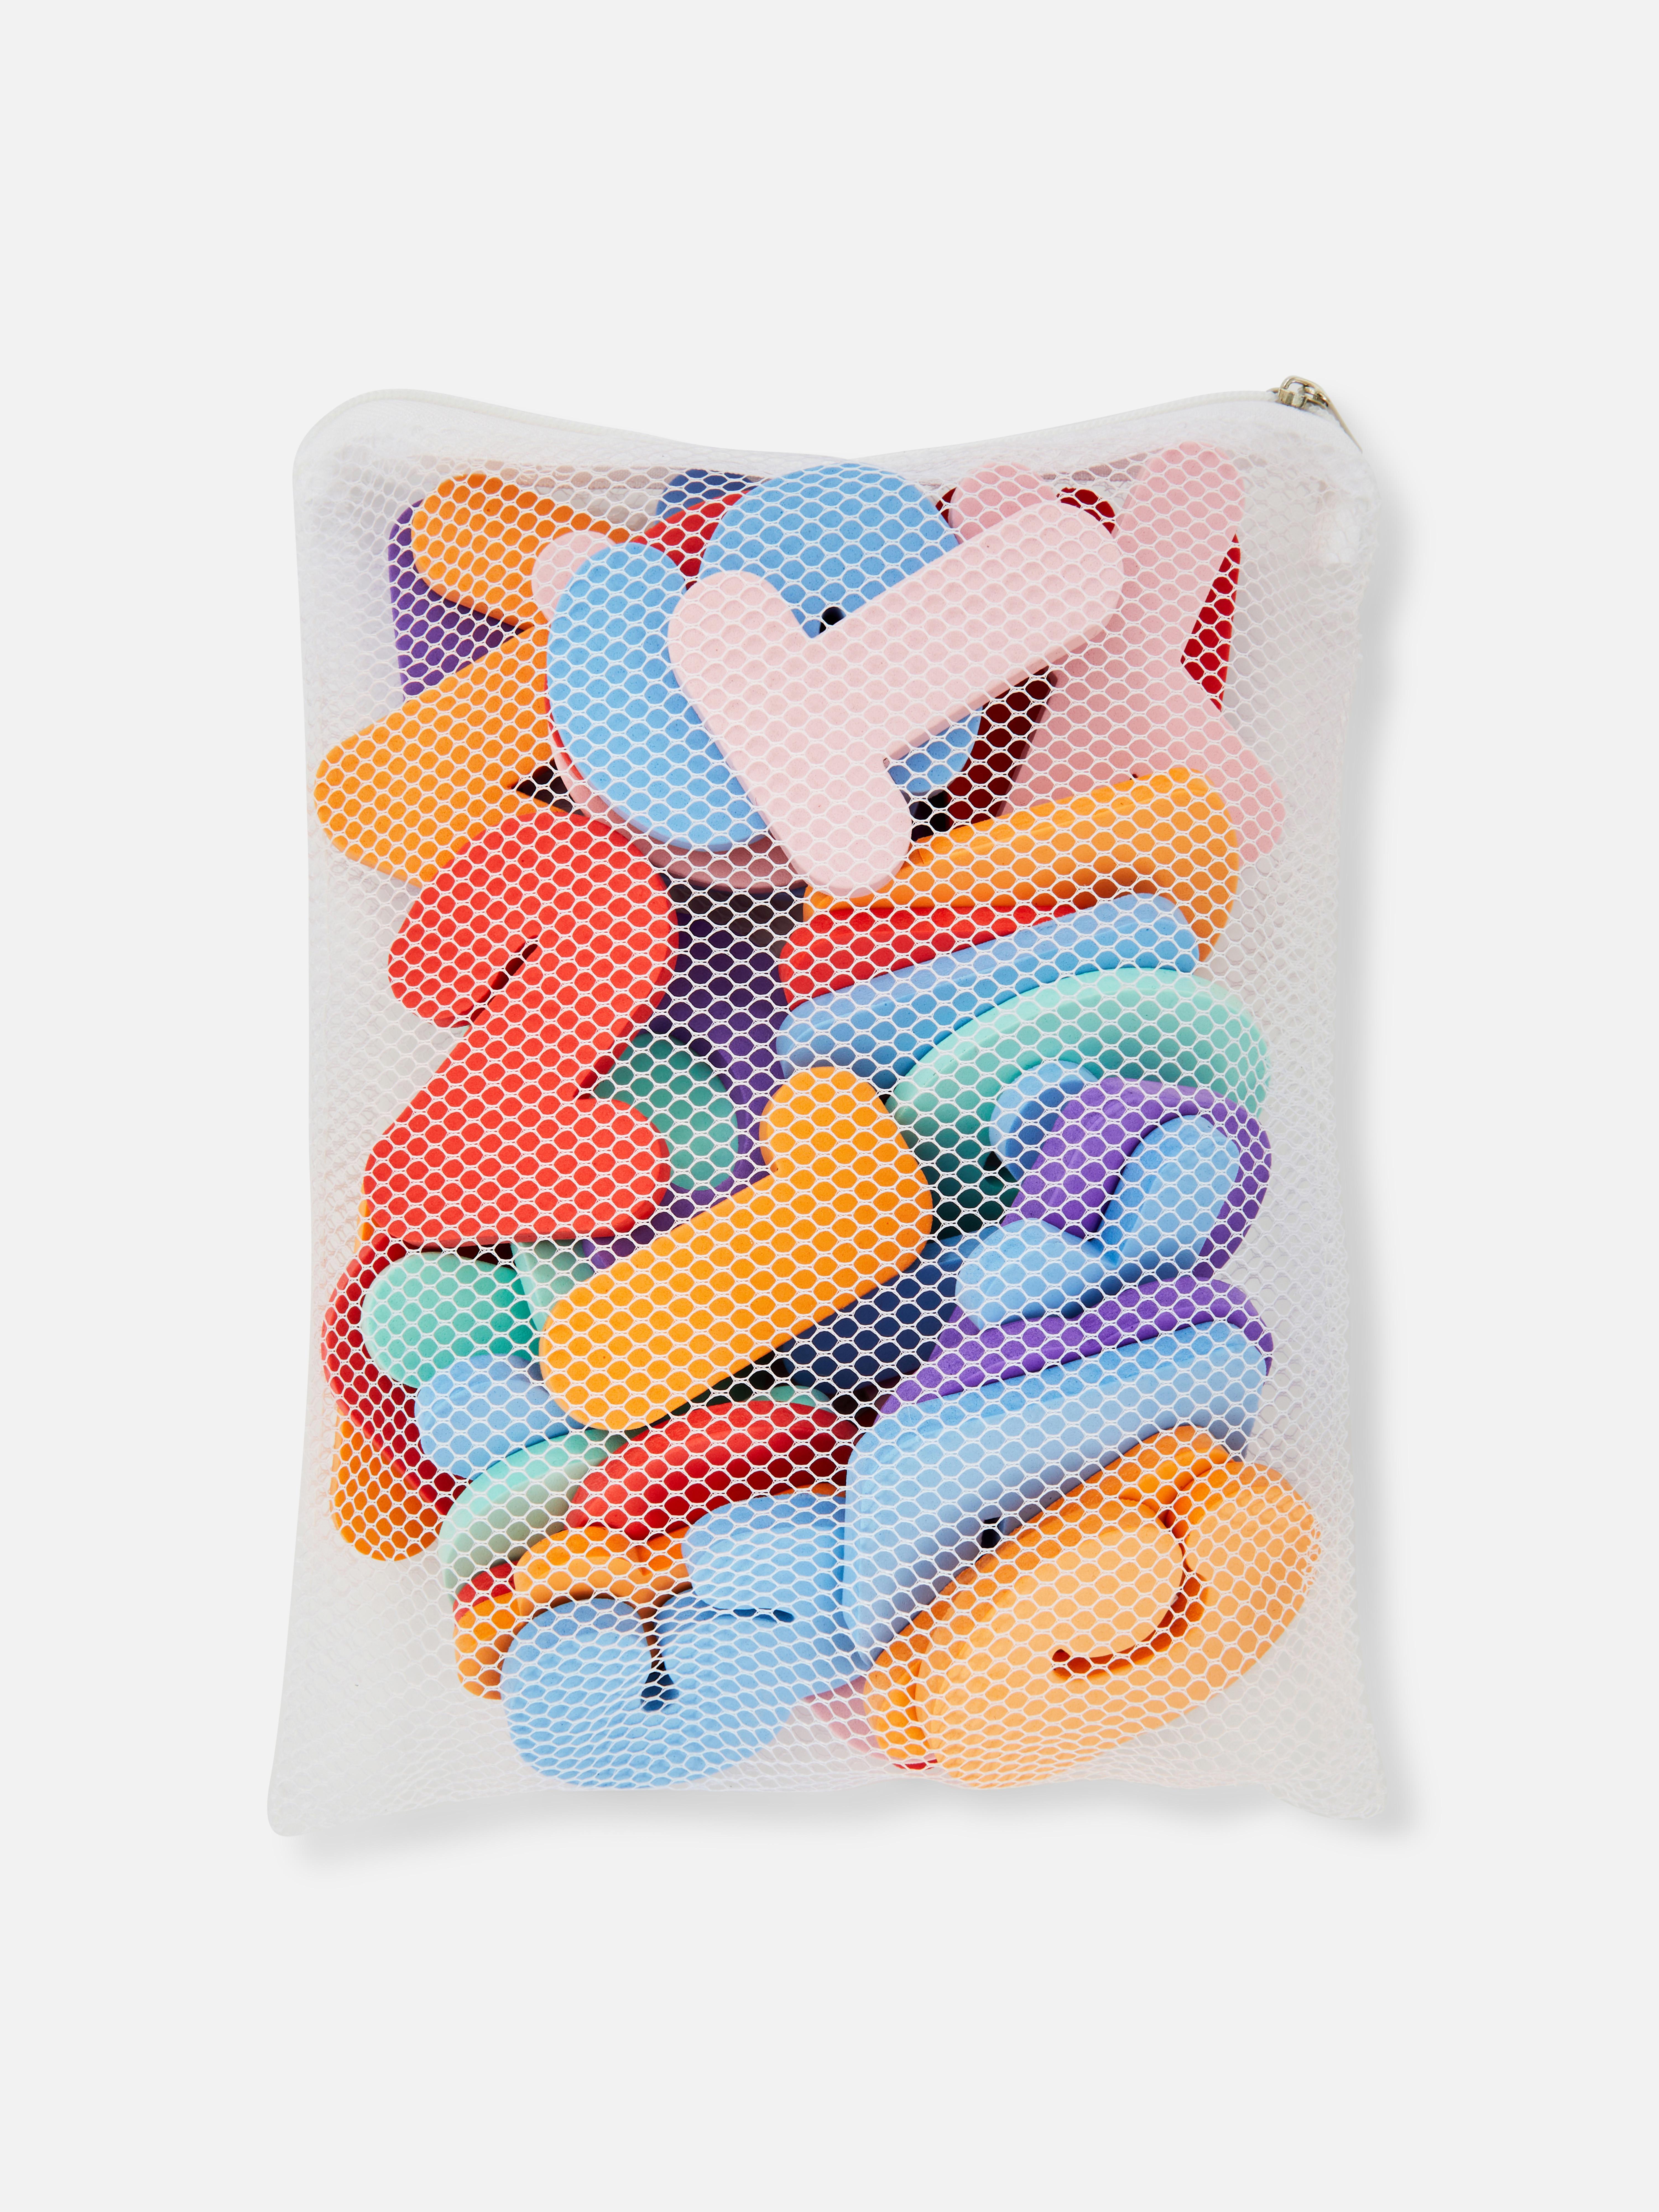 Foam Letter and Number Bath Toys